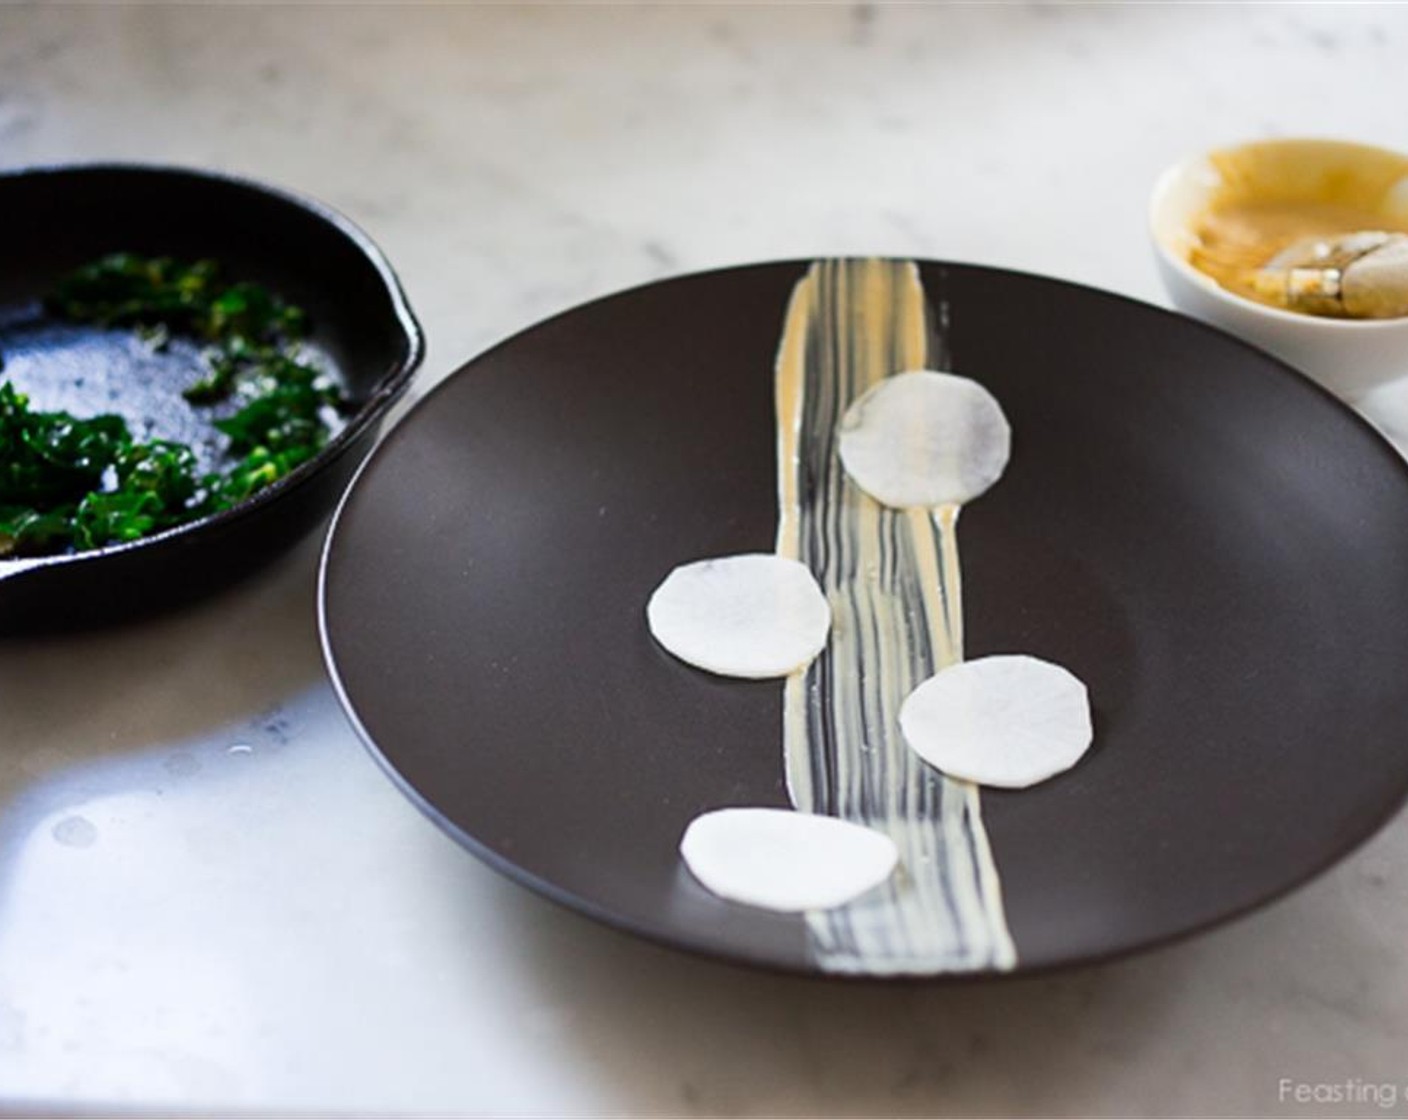 step 12 Plating doesn’t have to be intimidating. Have a plan. Do a practice plate. For this presentation, simply brush the miso aioli across the plate, either in the middle or to one side. Place the daikon along the line.